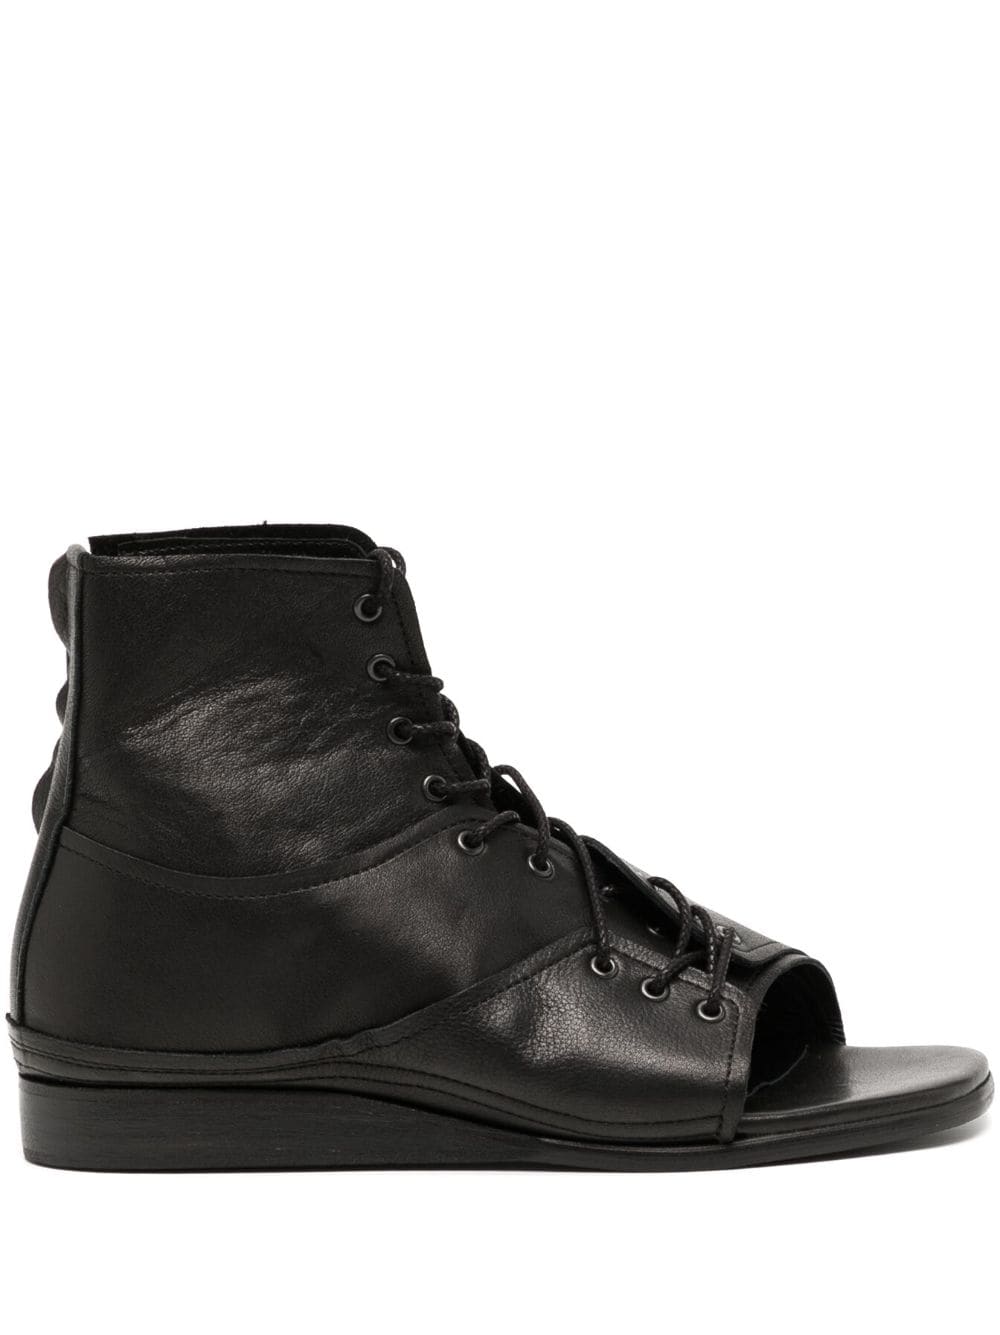 Y's open-toe leather boots - Black von Y's